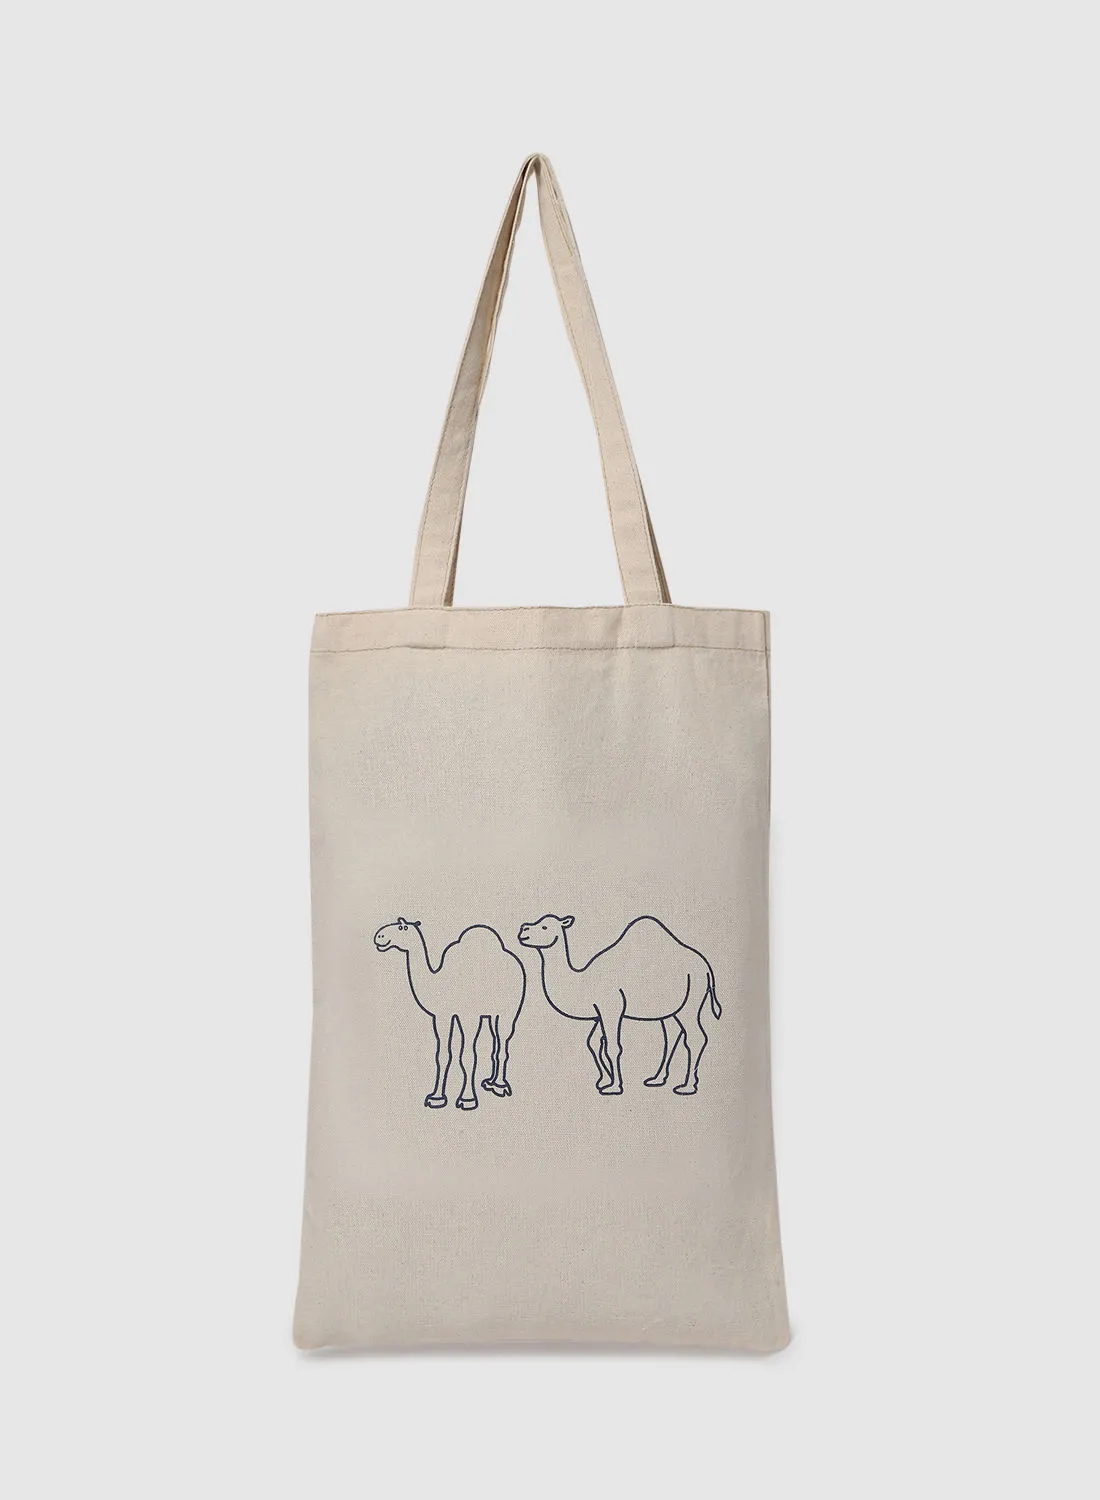 Amal Camel Print Canvas Shopping And Grocery Bag Color Shade May Vary Navy Blue/Beige